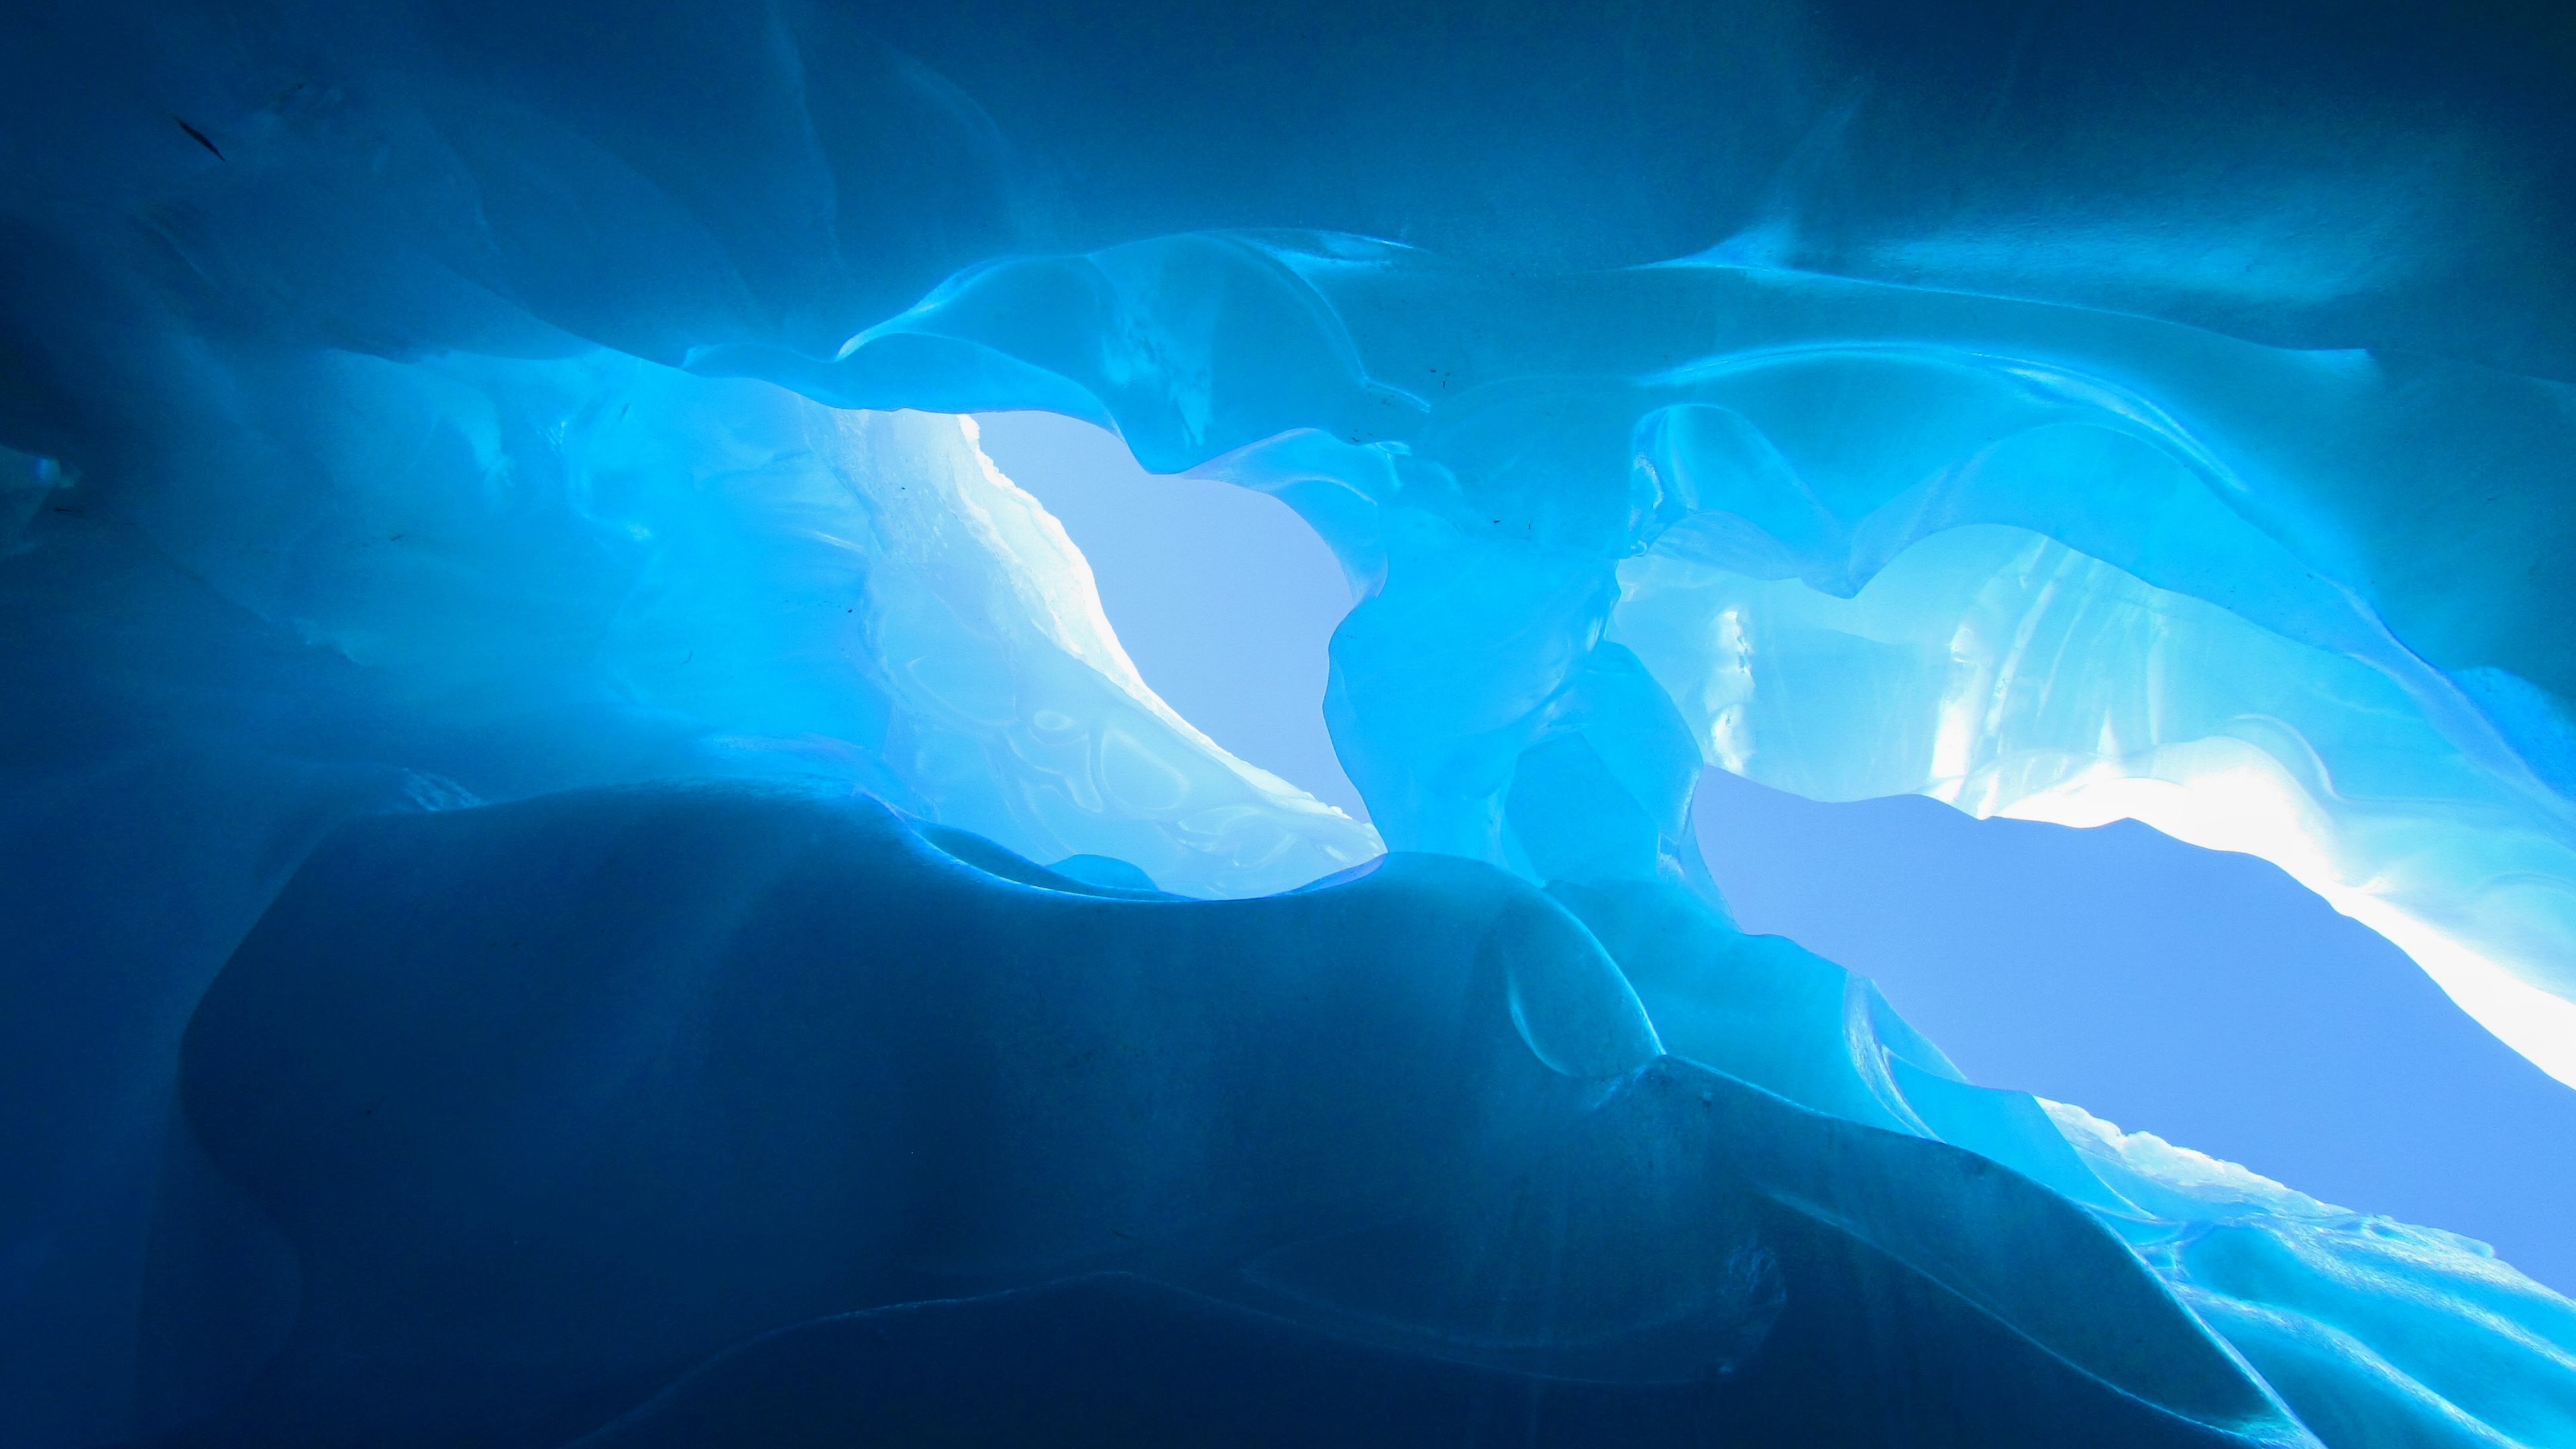 Nature Ice Cave HD Wallpaper | Background Image